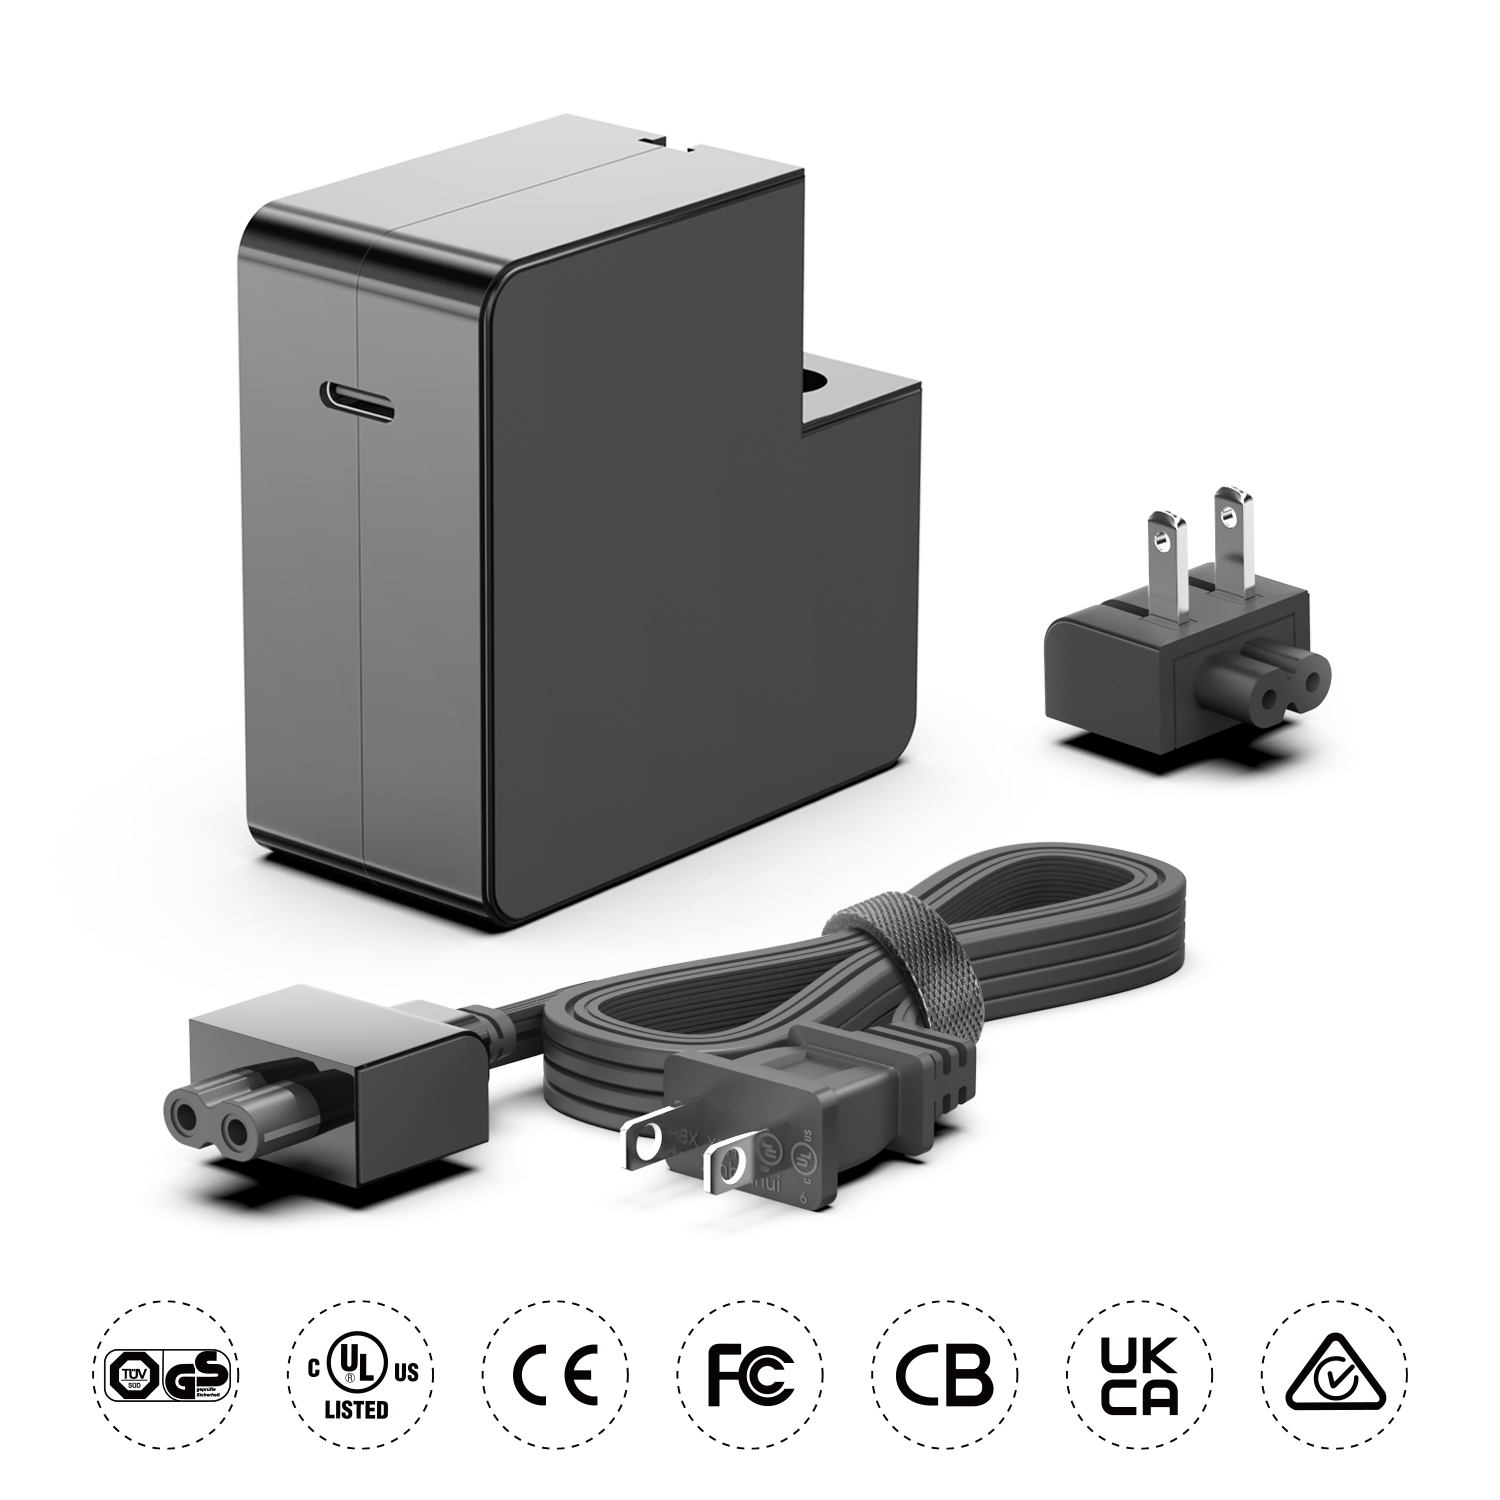 Detachable 45W USB C PD Power Adapter with Interchangeabl Plugs